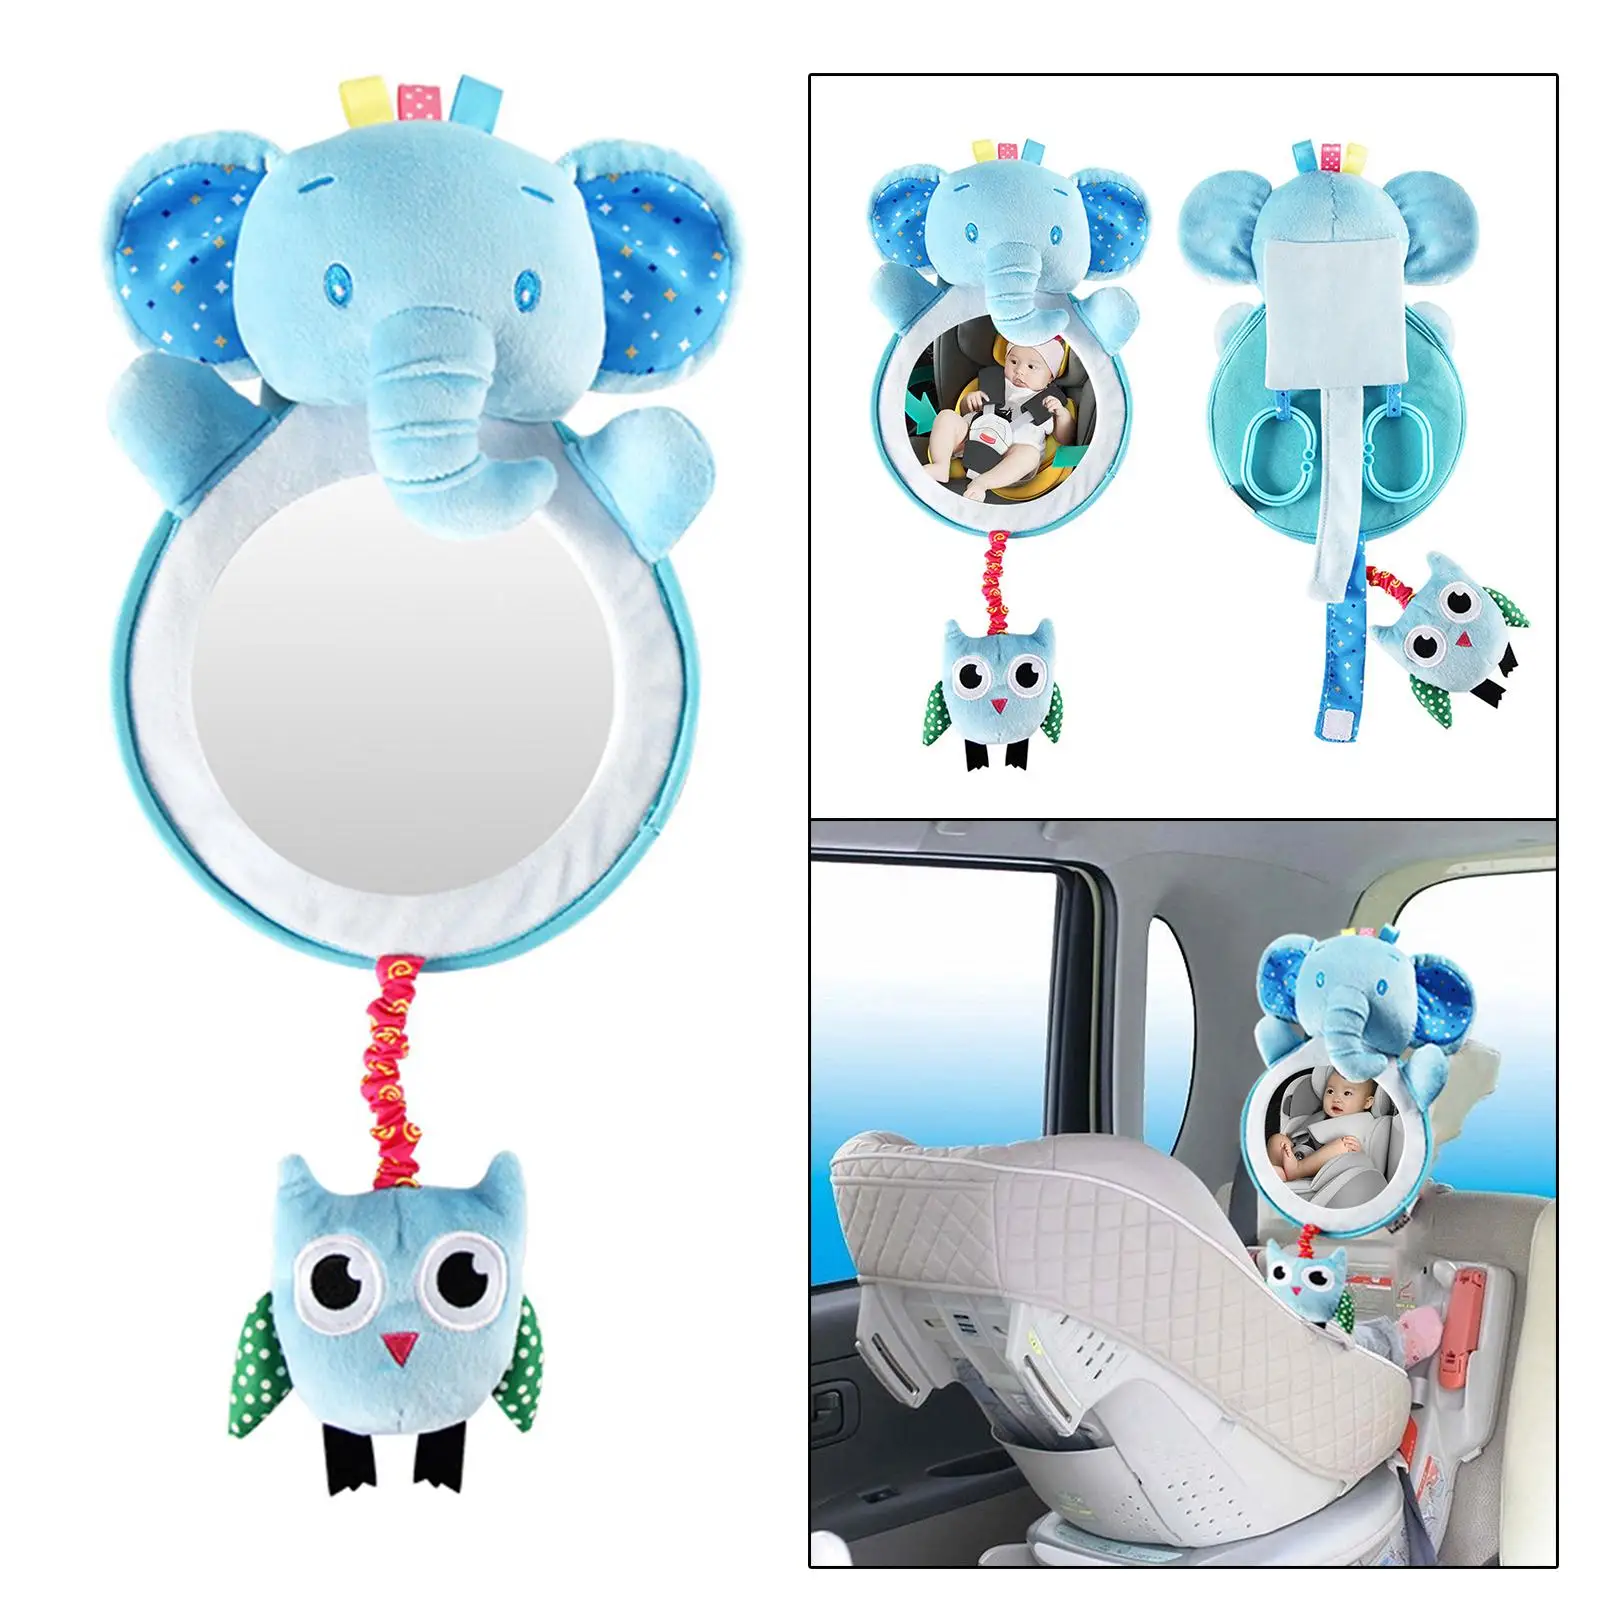 Adjustable Baby Mirror Kids Monitor View Back Seat Mirror for Infants